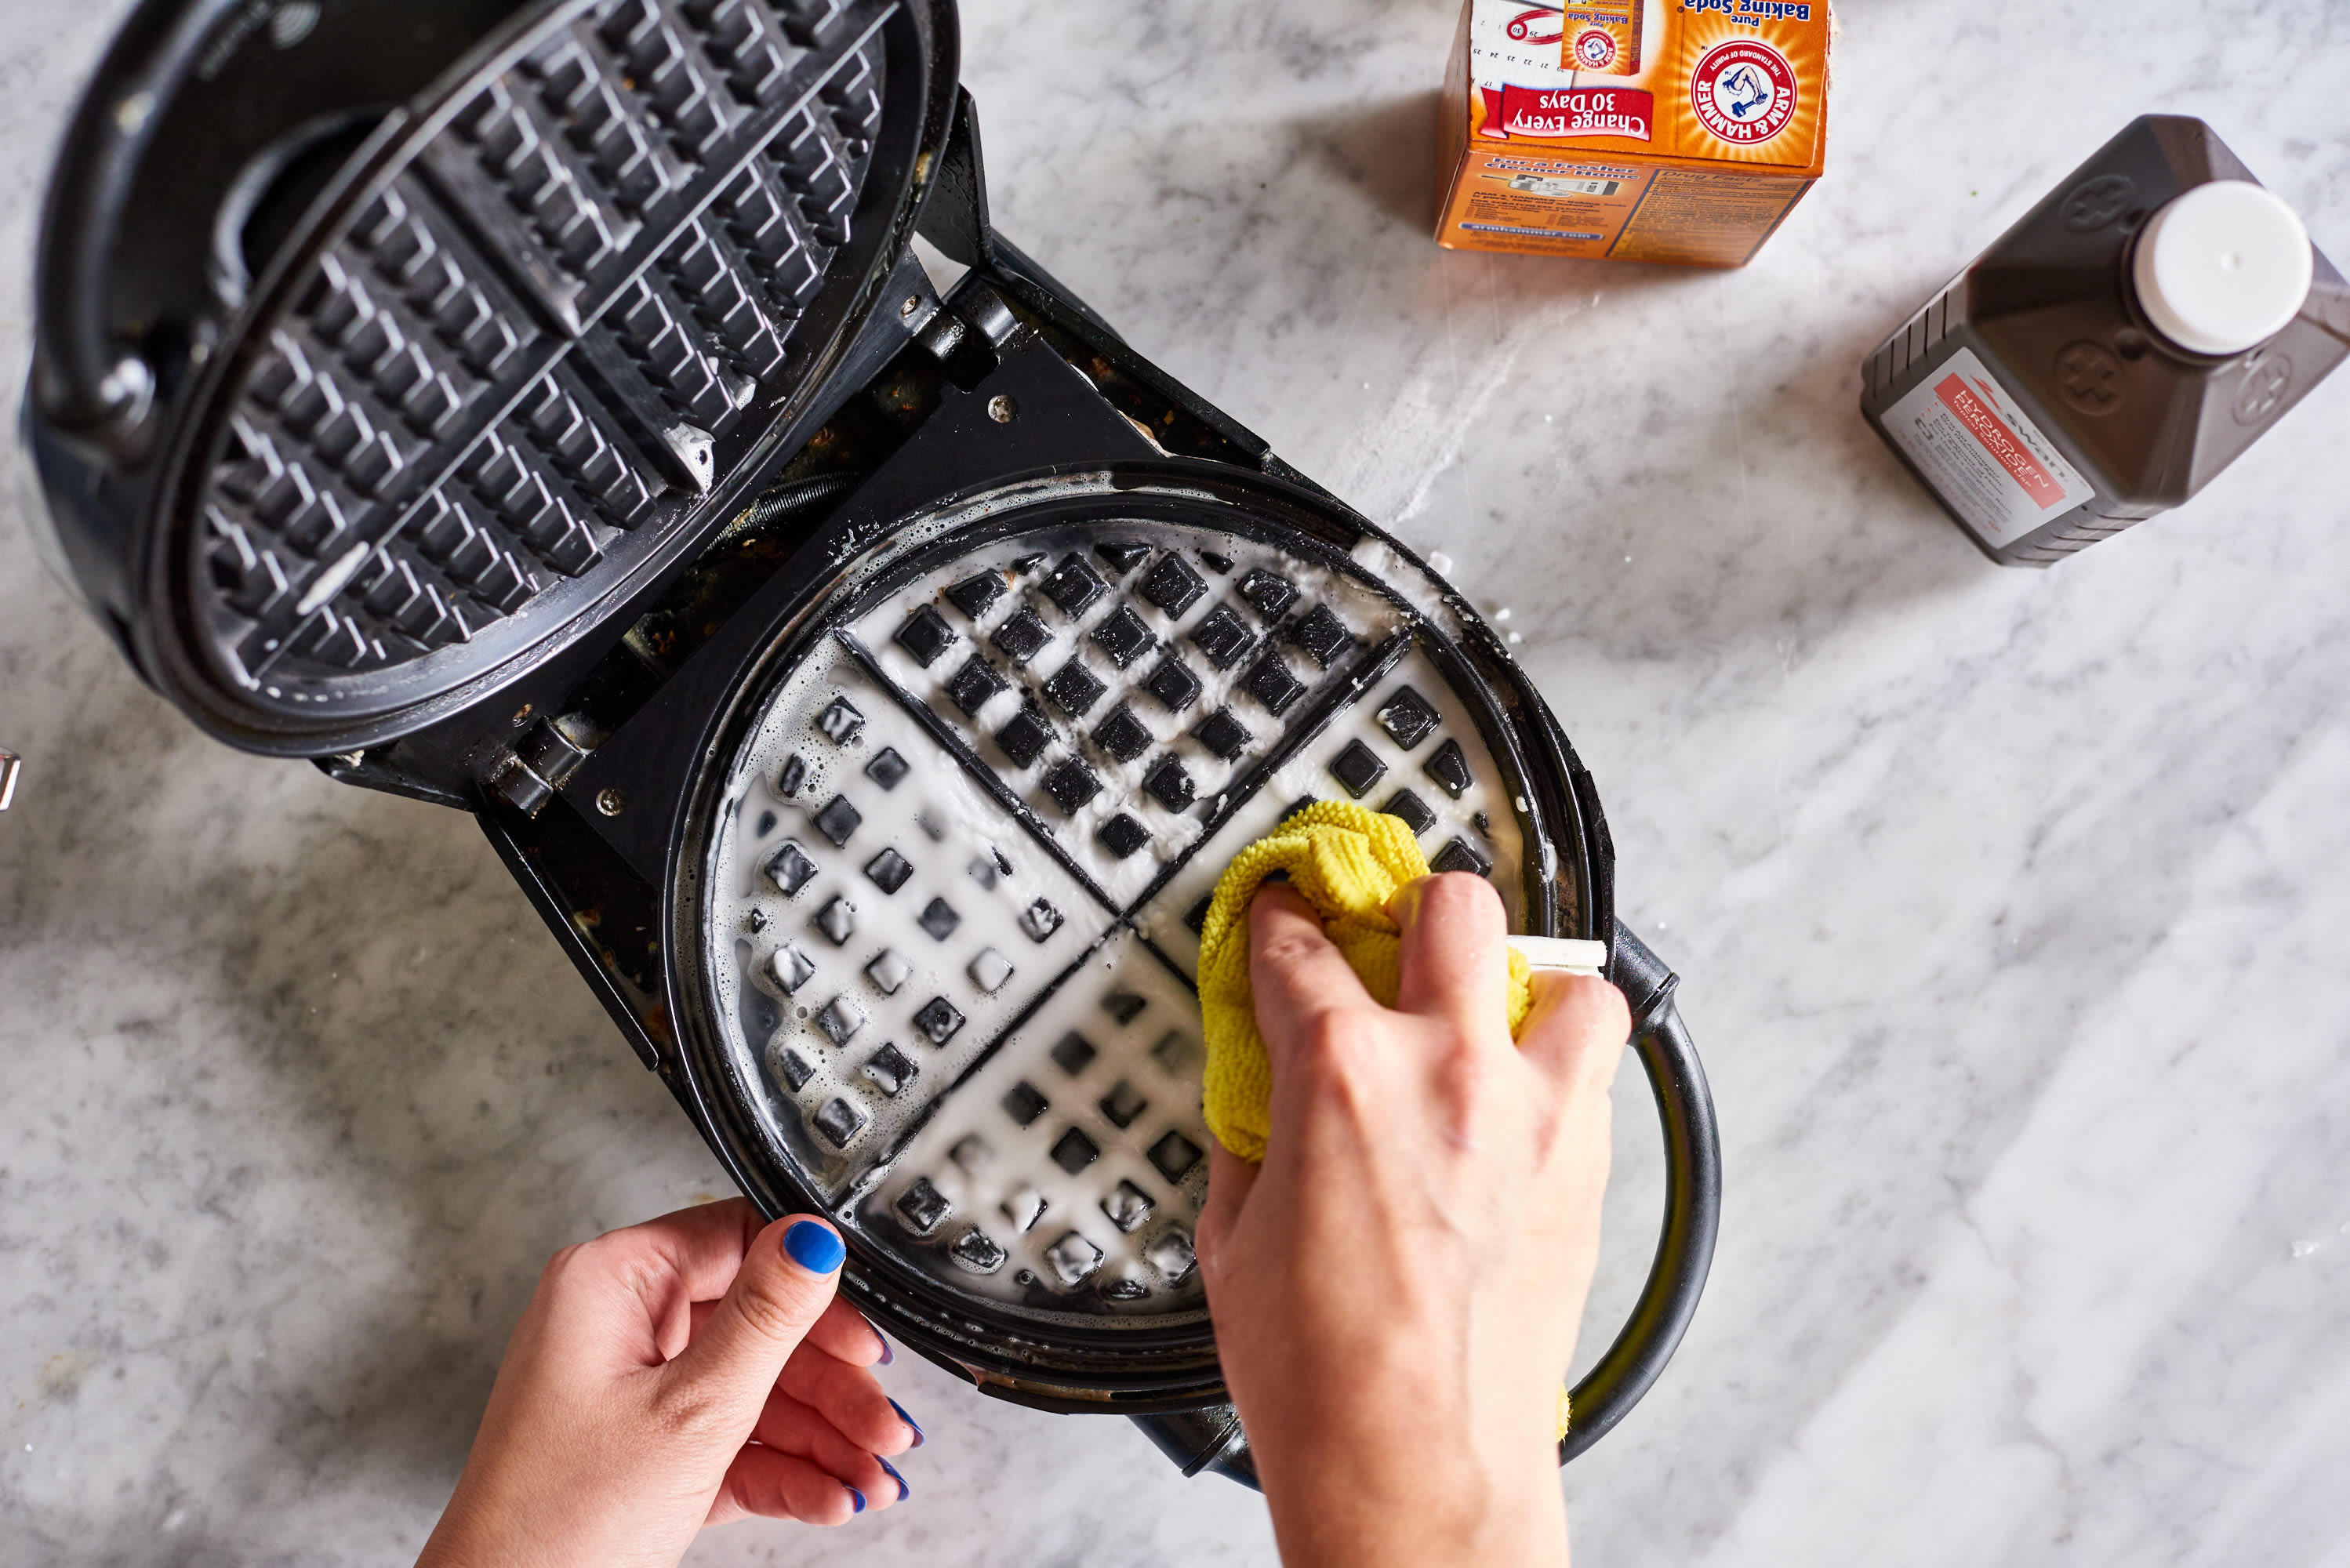 How To Clean a Waffle Maker  Kitchn